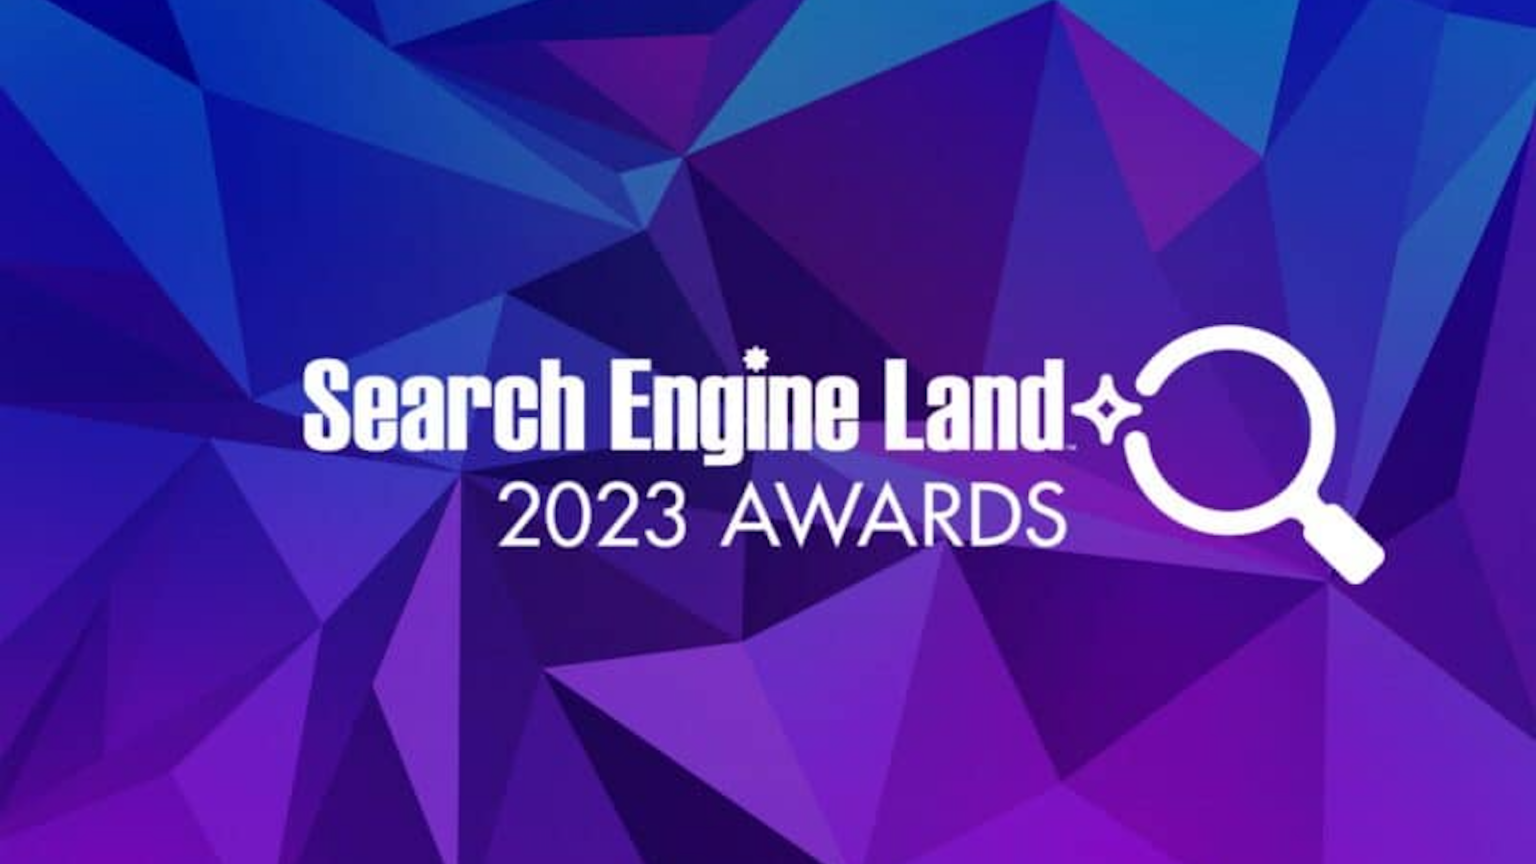 The Search Engine Land Awards The highest honor in search